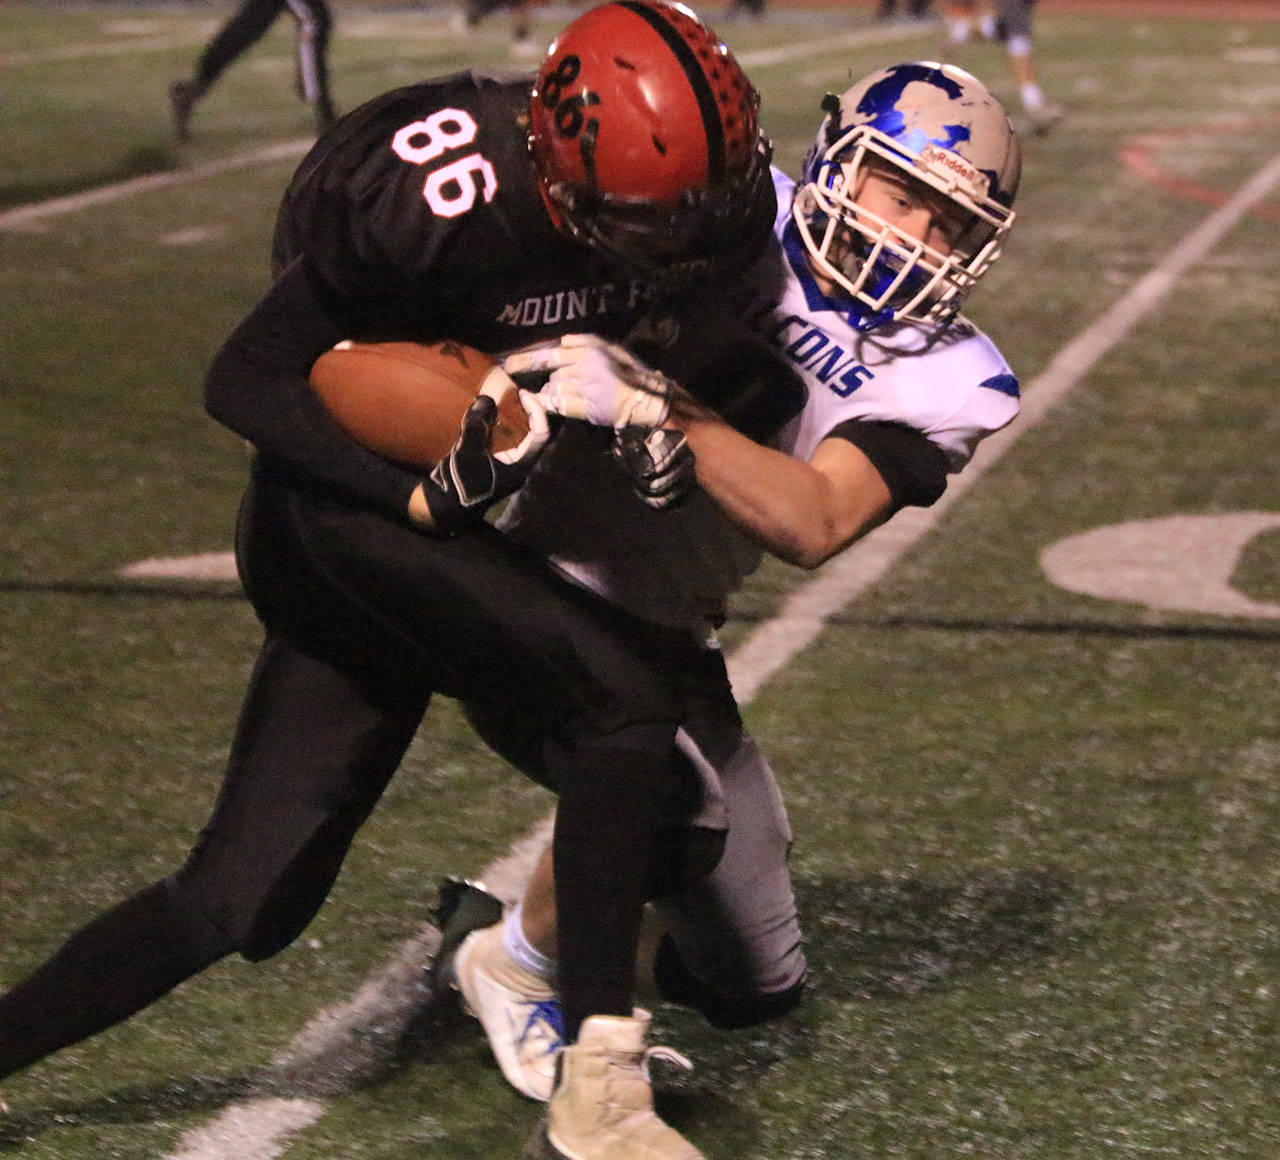 Bodie Hezel brings down Mount Baker’s Waylon Kentner.(Photo by Jim Waller/South Whidbey Record)